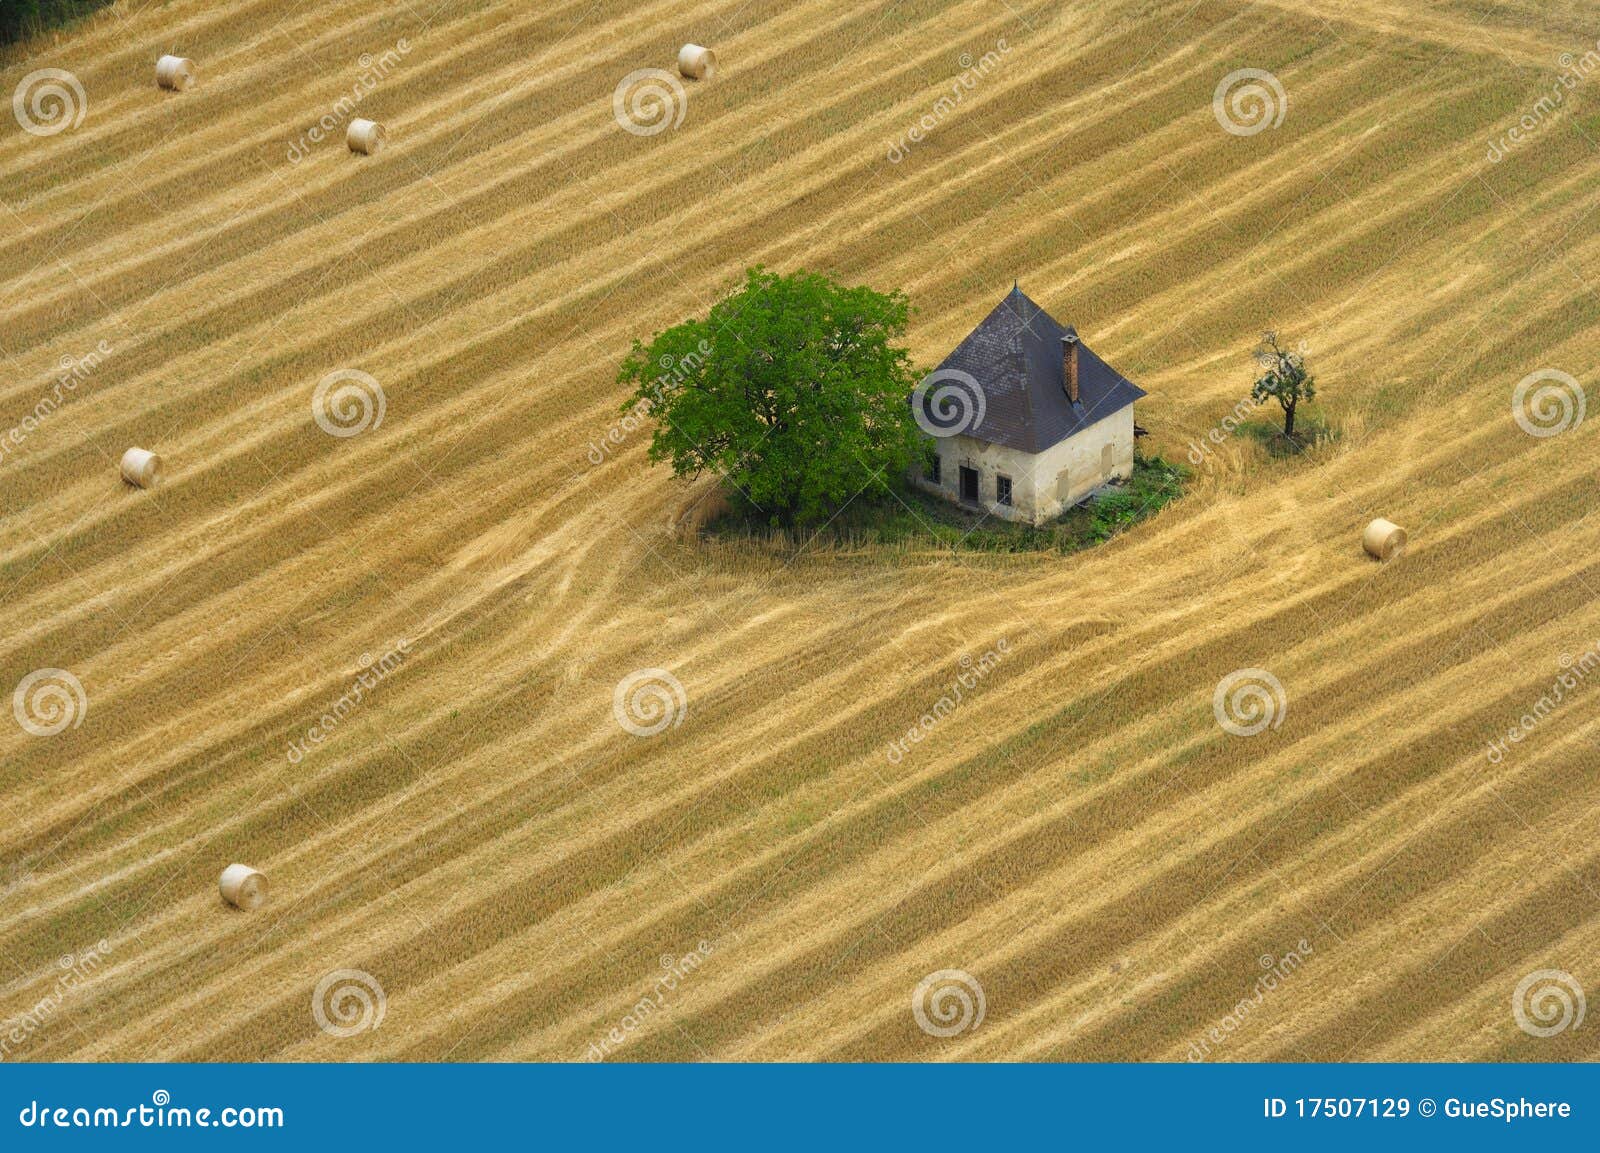 house in a cornfield